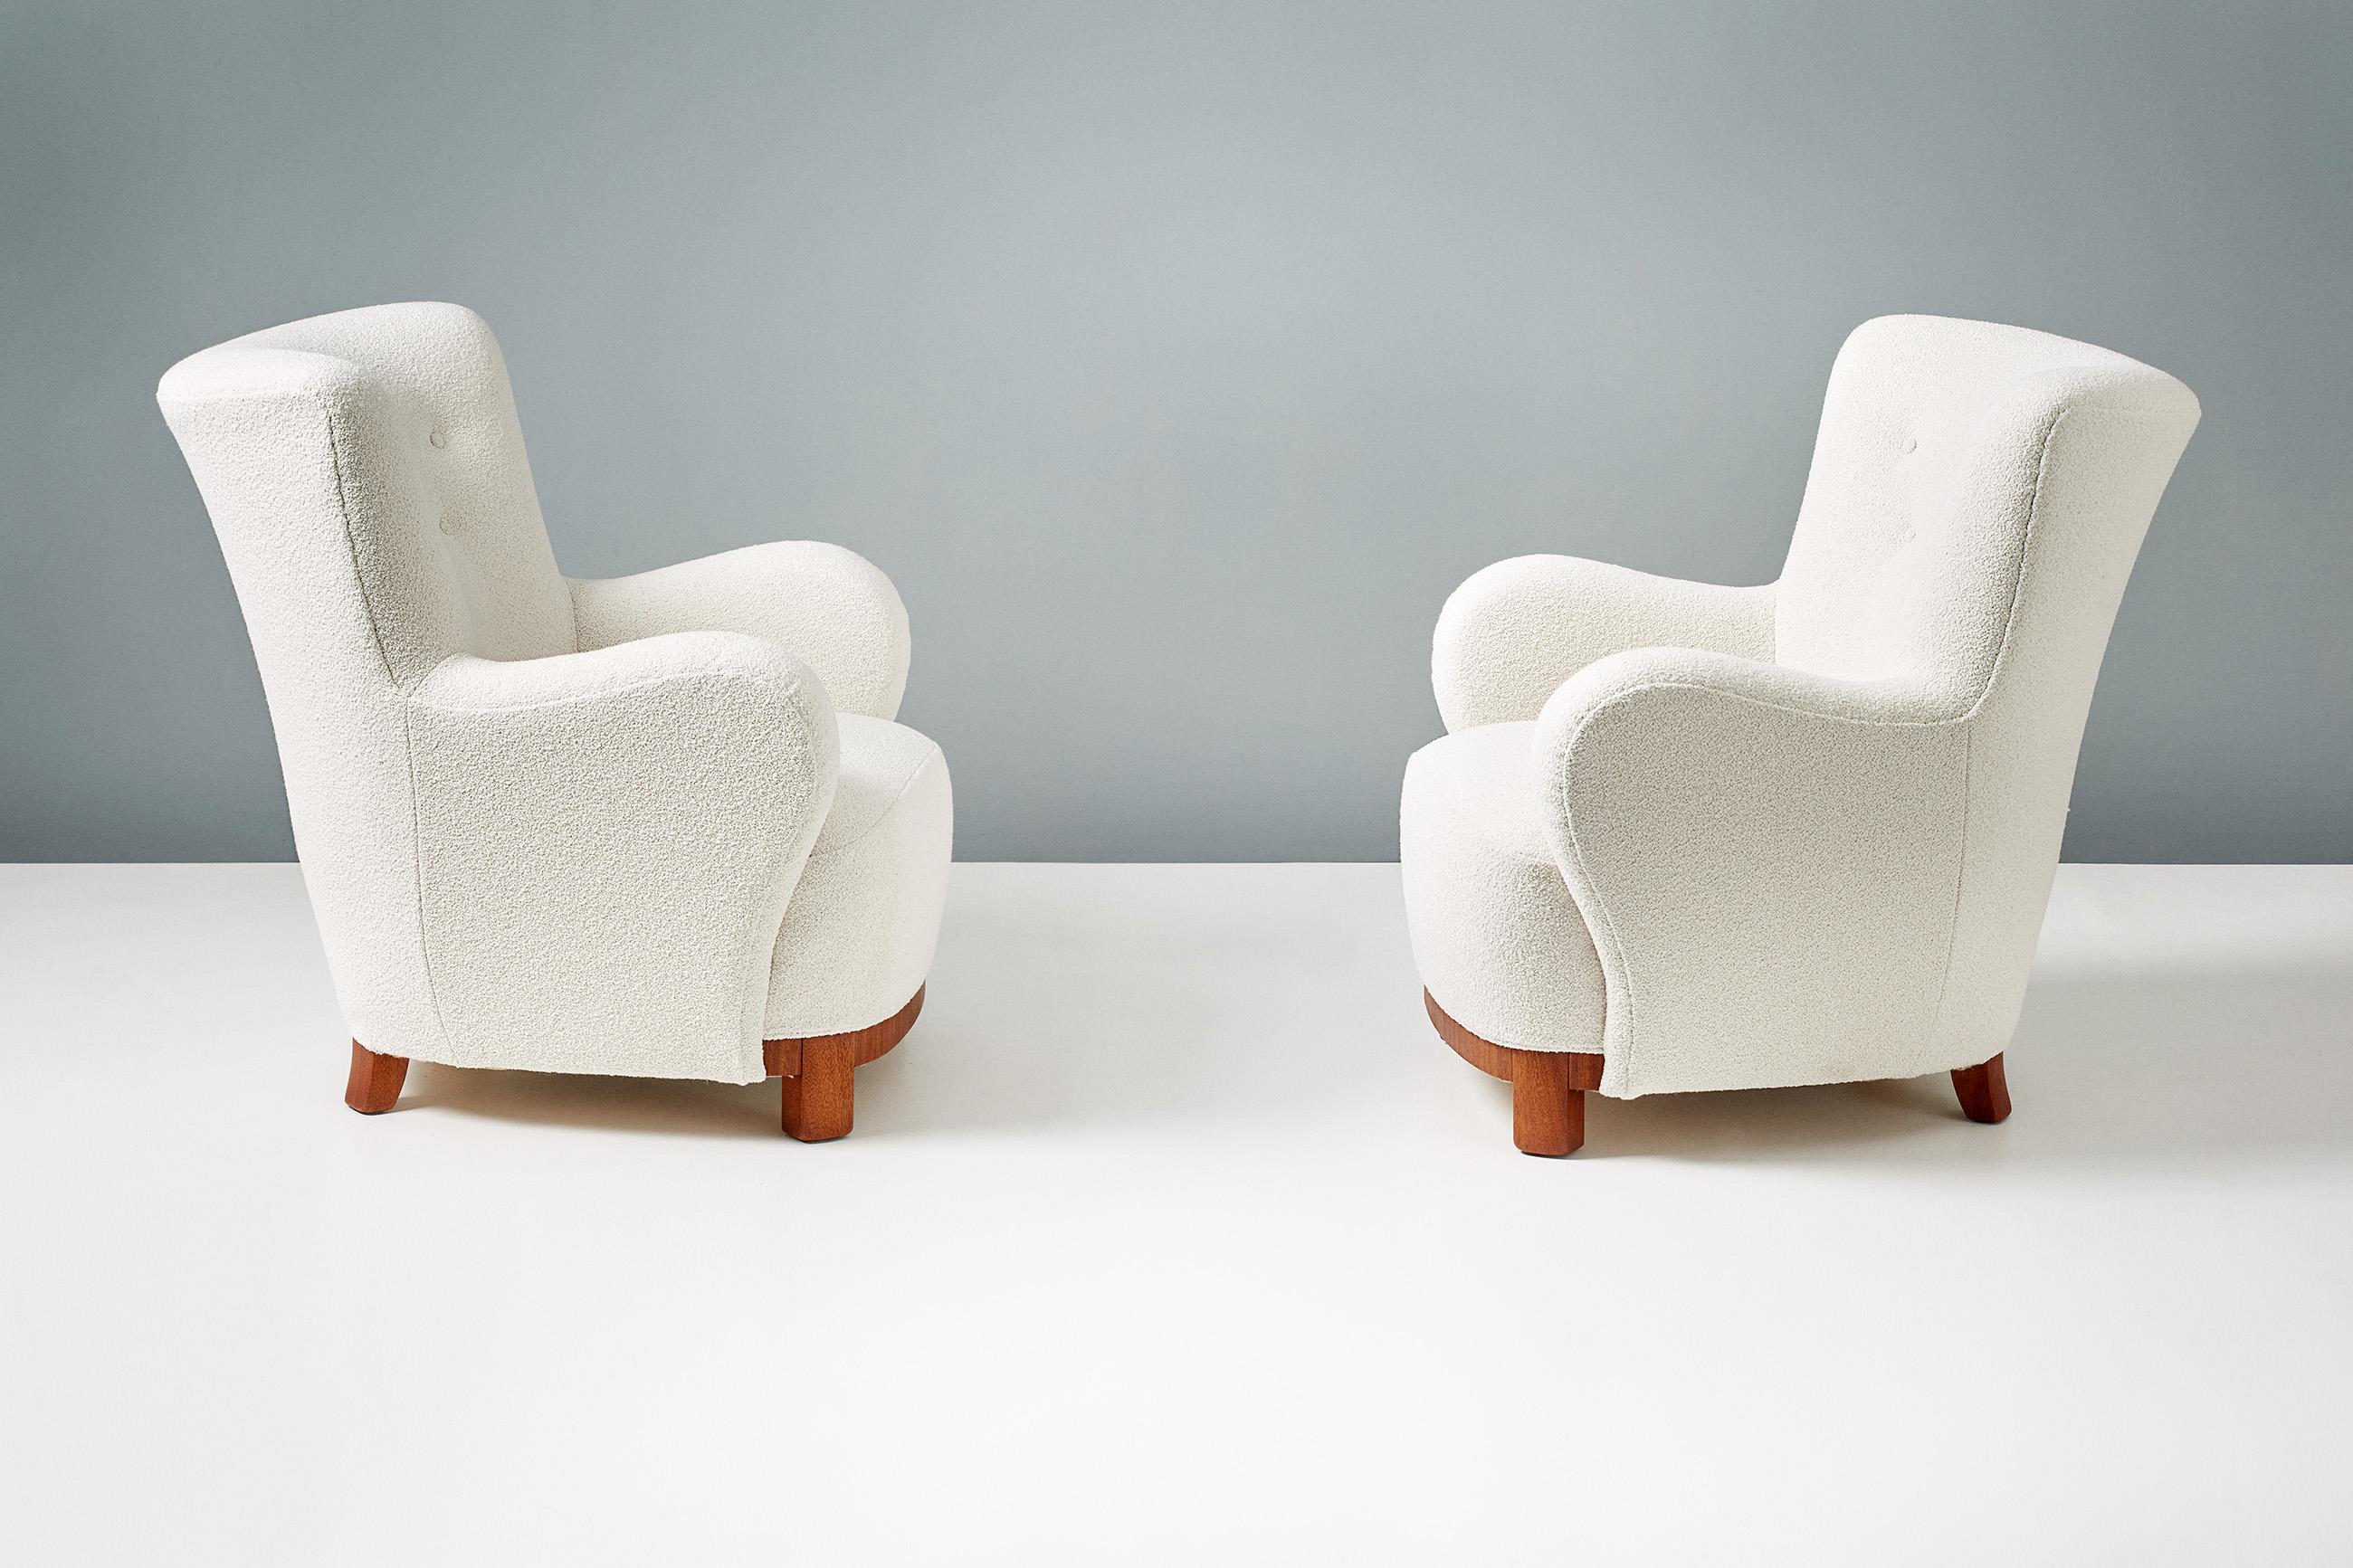 A pair of Danish cabinetmaker 1950s lounge chairs reupholstered in luxurious cotton-wool blend off-white bouclé fabric from Chase Erwin in England. The legs and based are made of African Mahogany. 

Each chair has been fully reconditioned in our